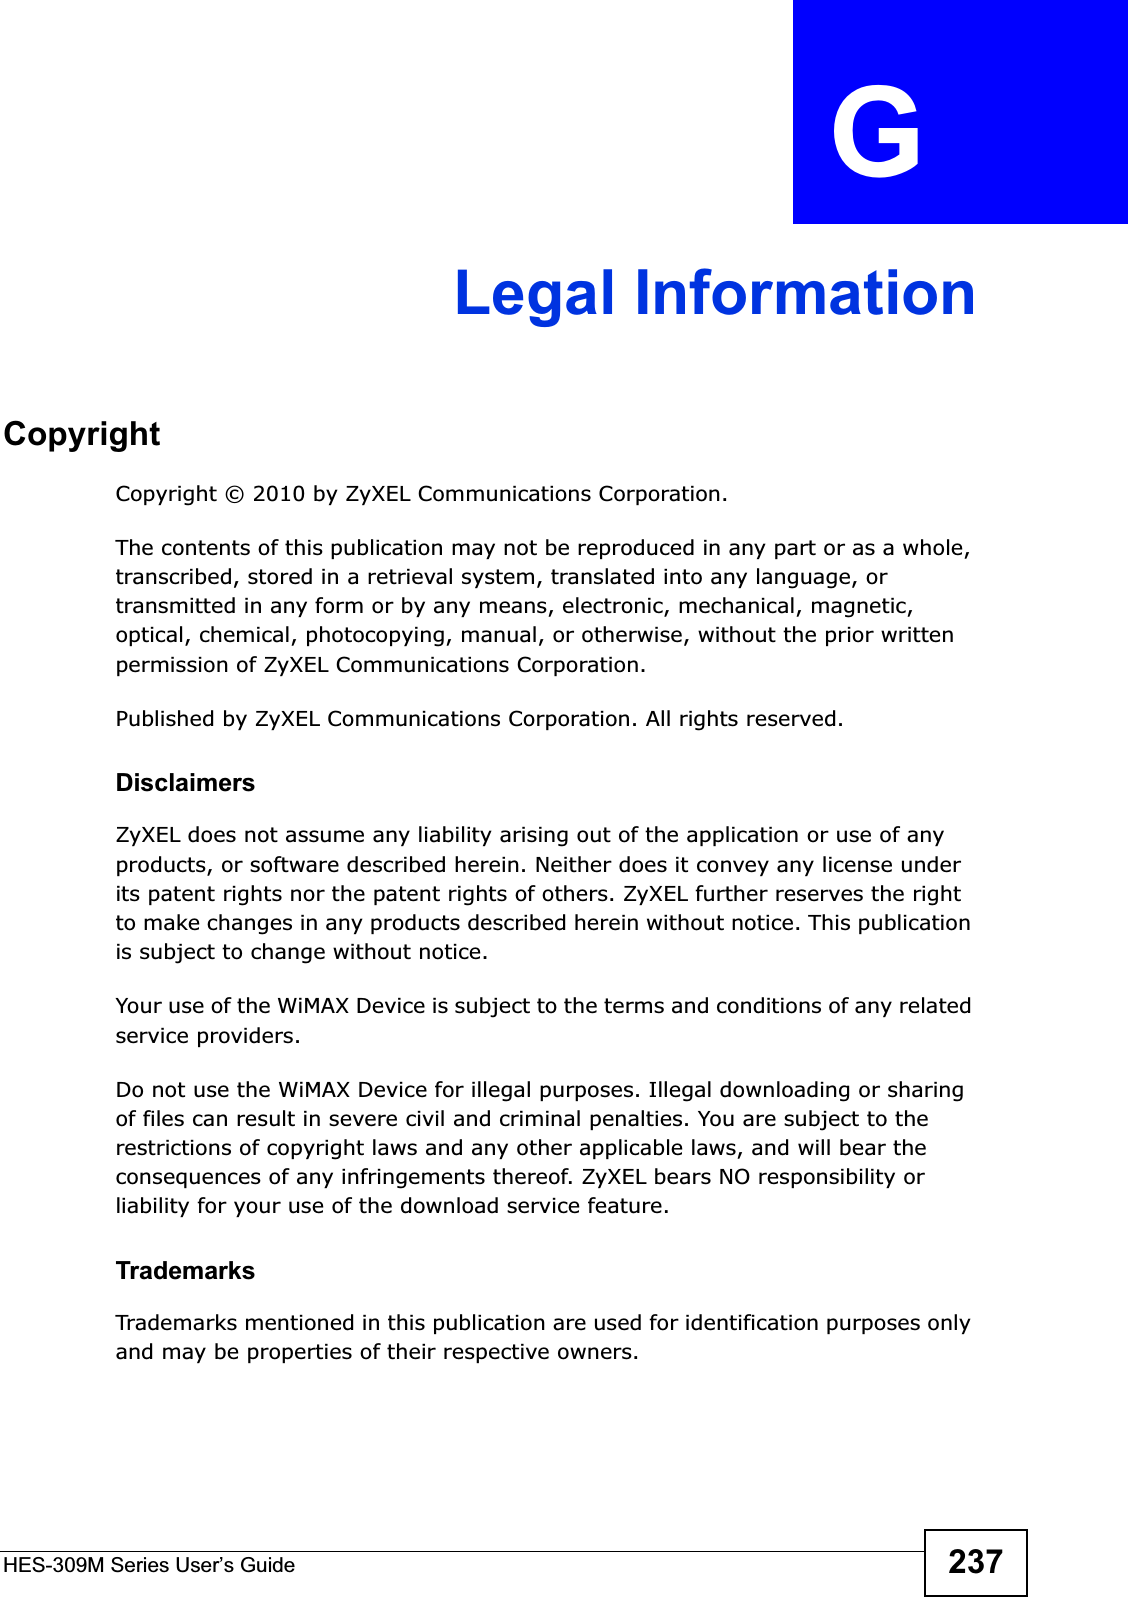 HES-309M Series User’s Guide 237APPENDIX  G Legal InformationCopyrightCopyright © 2010 by ZyXEL Communications Corporation.The contents of this publication may not be reproduced in any part or as a whole, transcribed, stored in a retrieval system, translated into any language, or transmitted in any form or by any means, electronic, mechanical, magnetic, optical, chemical, photocopying, manual, or otherwise, without the prior written permission of ZyXEL Communications Corporation.Published by ZyXEL Communications Corporation. All rights reserved.DisclaimersZyXEL does not assume any liability arising out of the application or use of any products, or software described herein. Neither does it convey any license under its patent rights nor the patent rights of others. ZyXEL further reserves the right to make changes in any products described herein without notice. This publication is subject to change without notice.Your use of the WiMAX Device is subject to the terms and conditions of any related service providers.Do not use the WiMAX Device for illegal purposes. Illegal downloading or sharing of files can result in severe civil and criminal penalties. You are subject to the restrictions of copyright laws and any other applicable laws, and will bear the consequences of any infringements thereof. ZyXEL bears NO responsibility or liability for your use of the download service feature.TrademarksTrademarks mentioned in this publication are used for identification purposes only and may be properties of their respective owners.